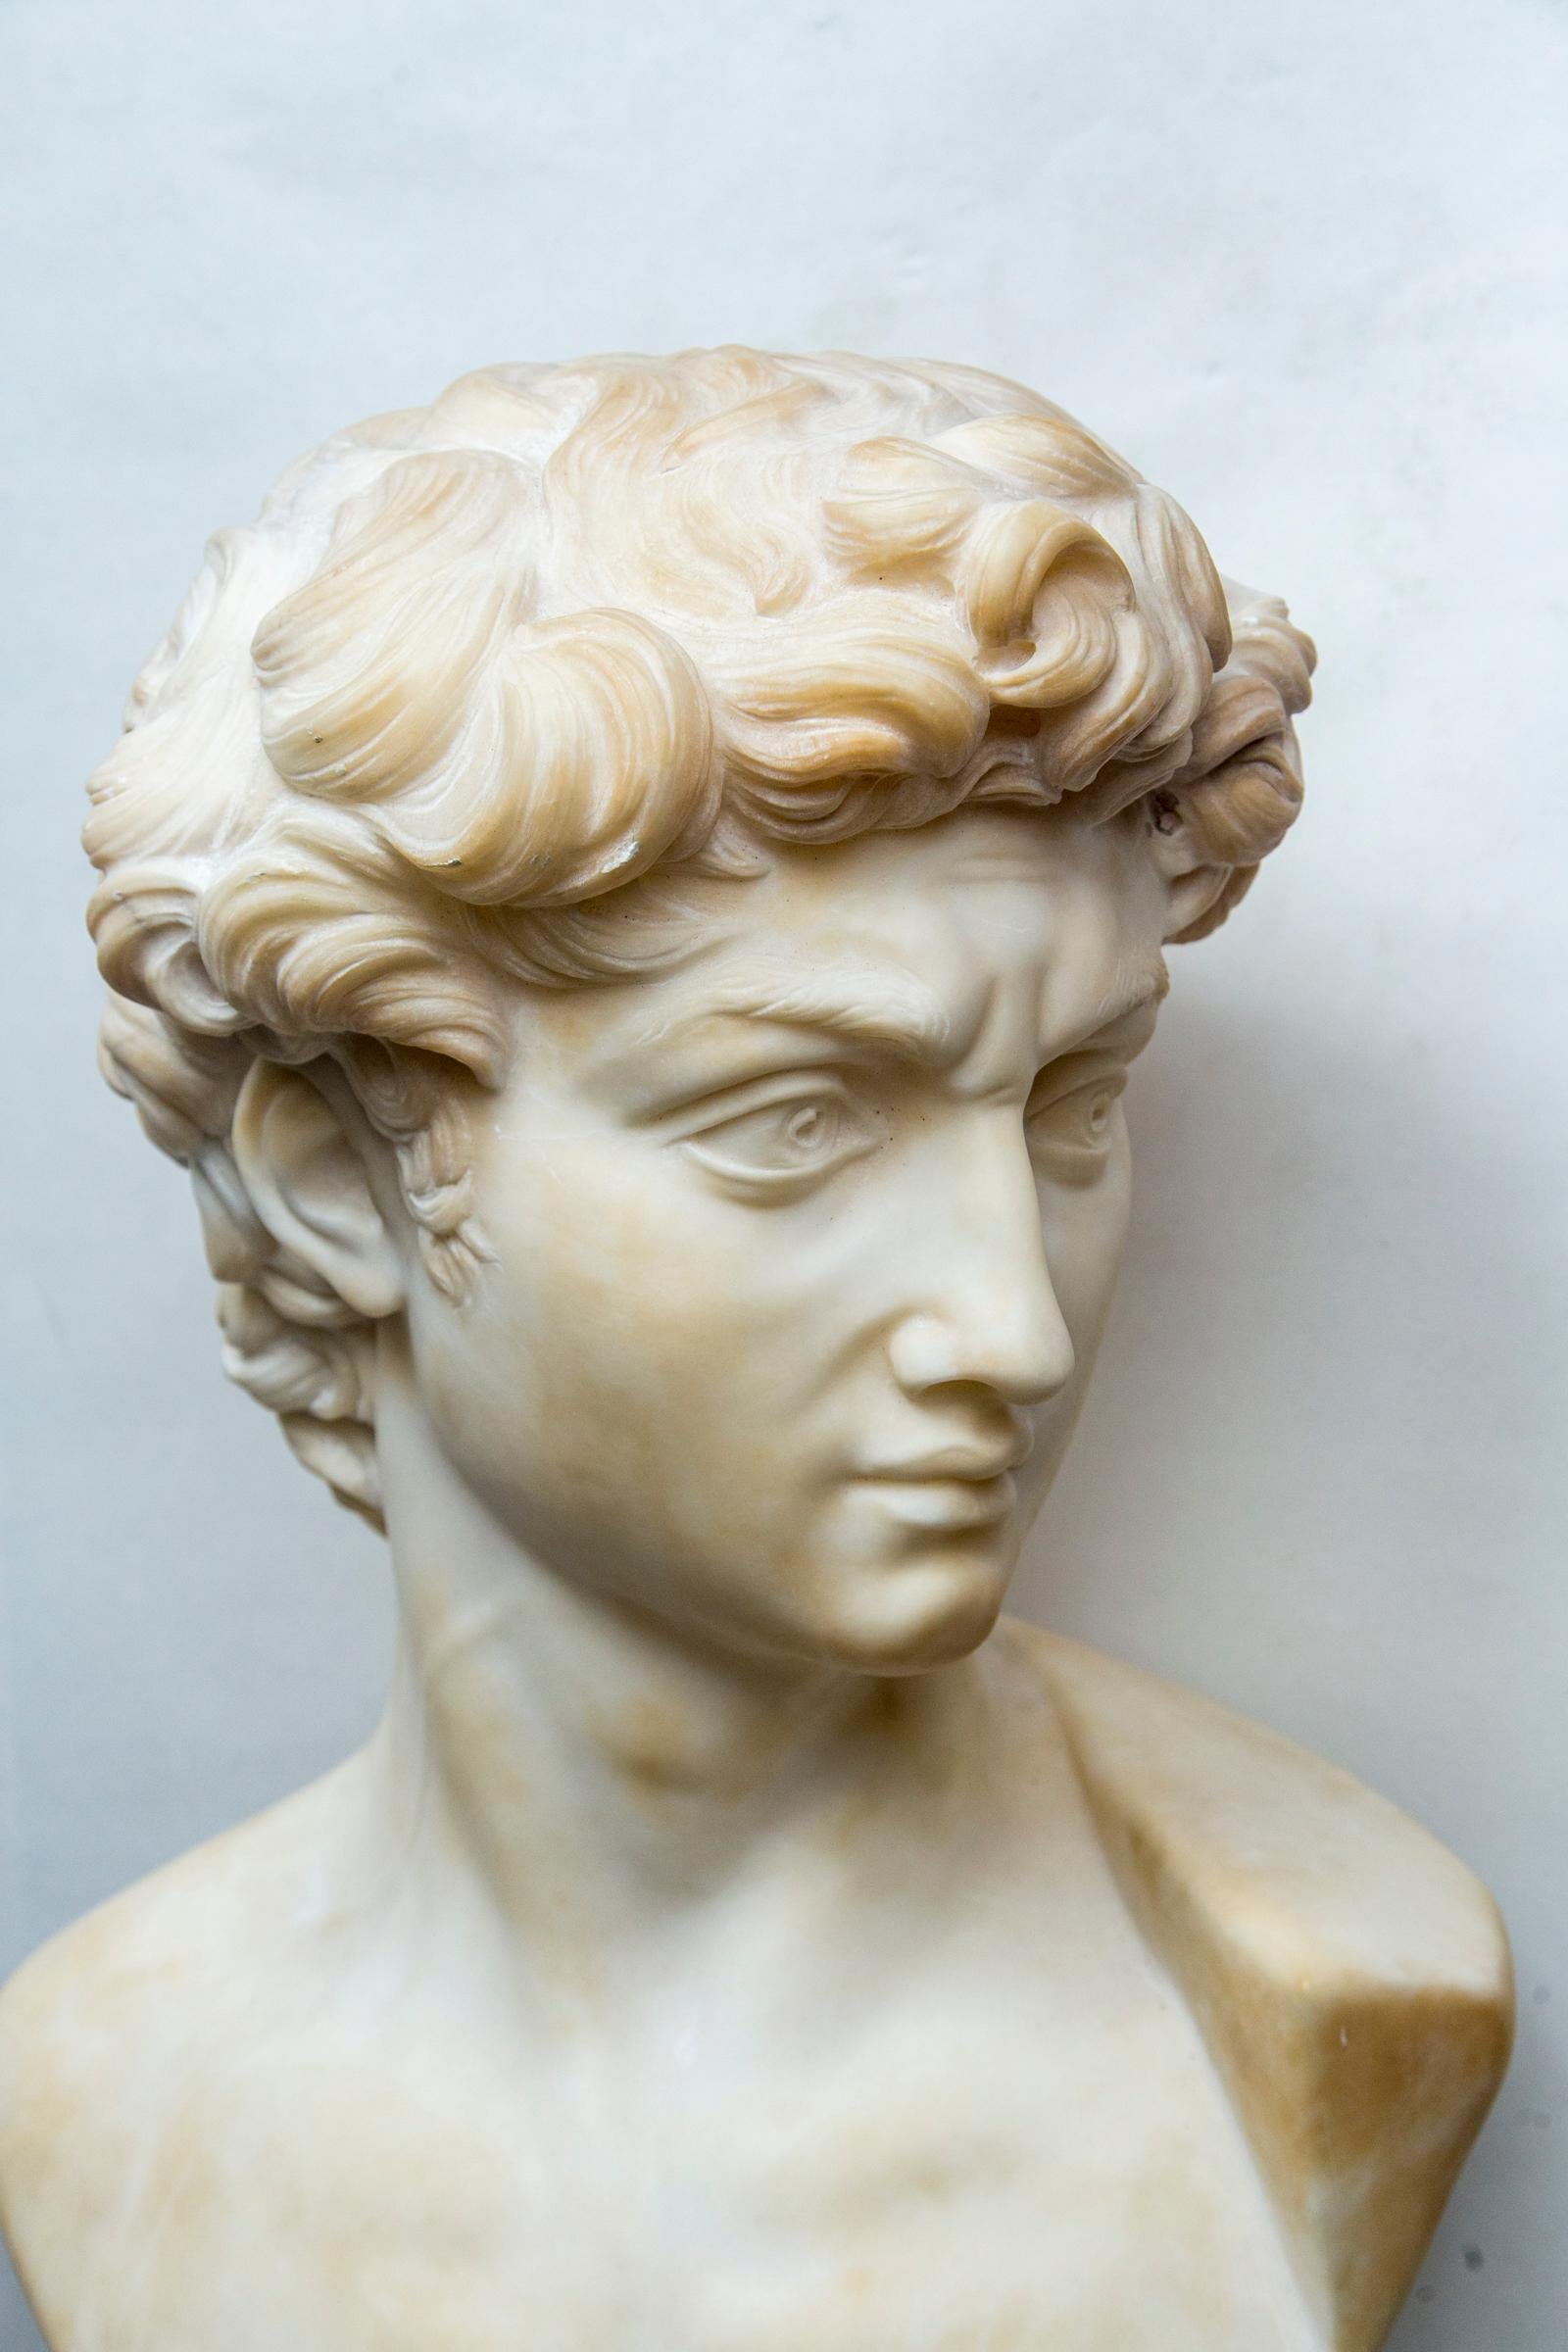 A well executed marble bust of King David as a youth, copied from the original at the Galleria dell'Accademia, Florence, Italy. It is one of the most famous works of art in the world 
David is a masterpiece of Renaissance sculpture created in marble